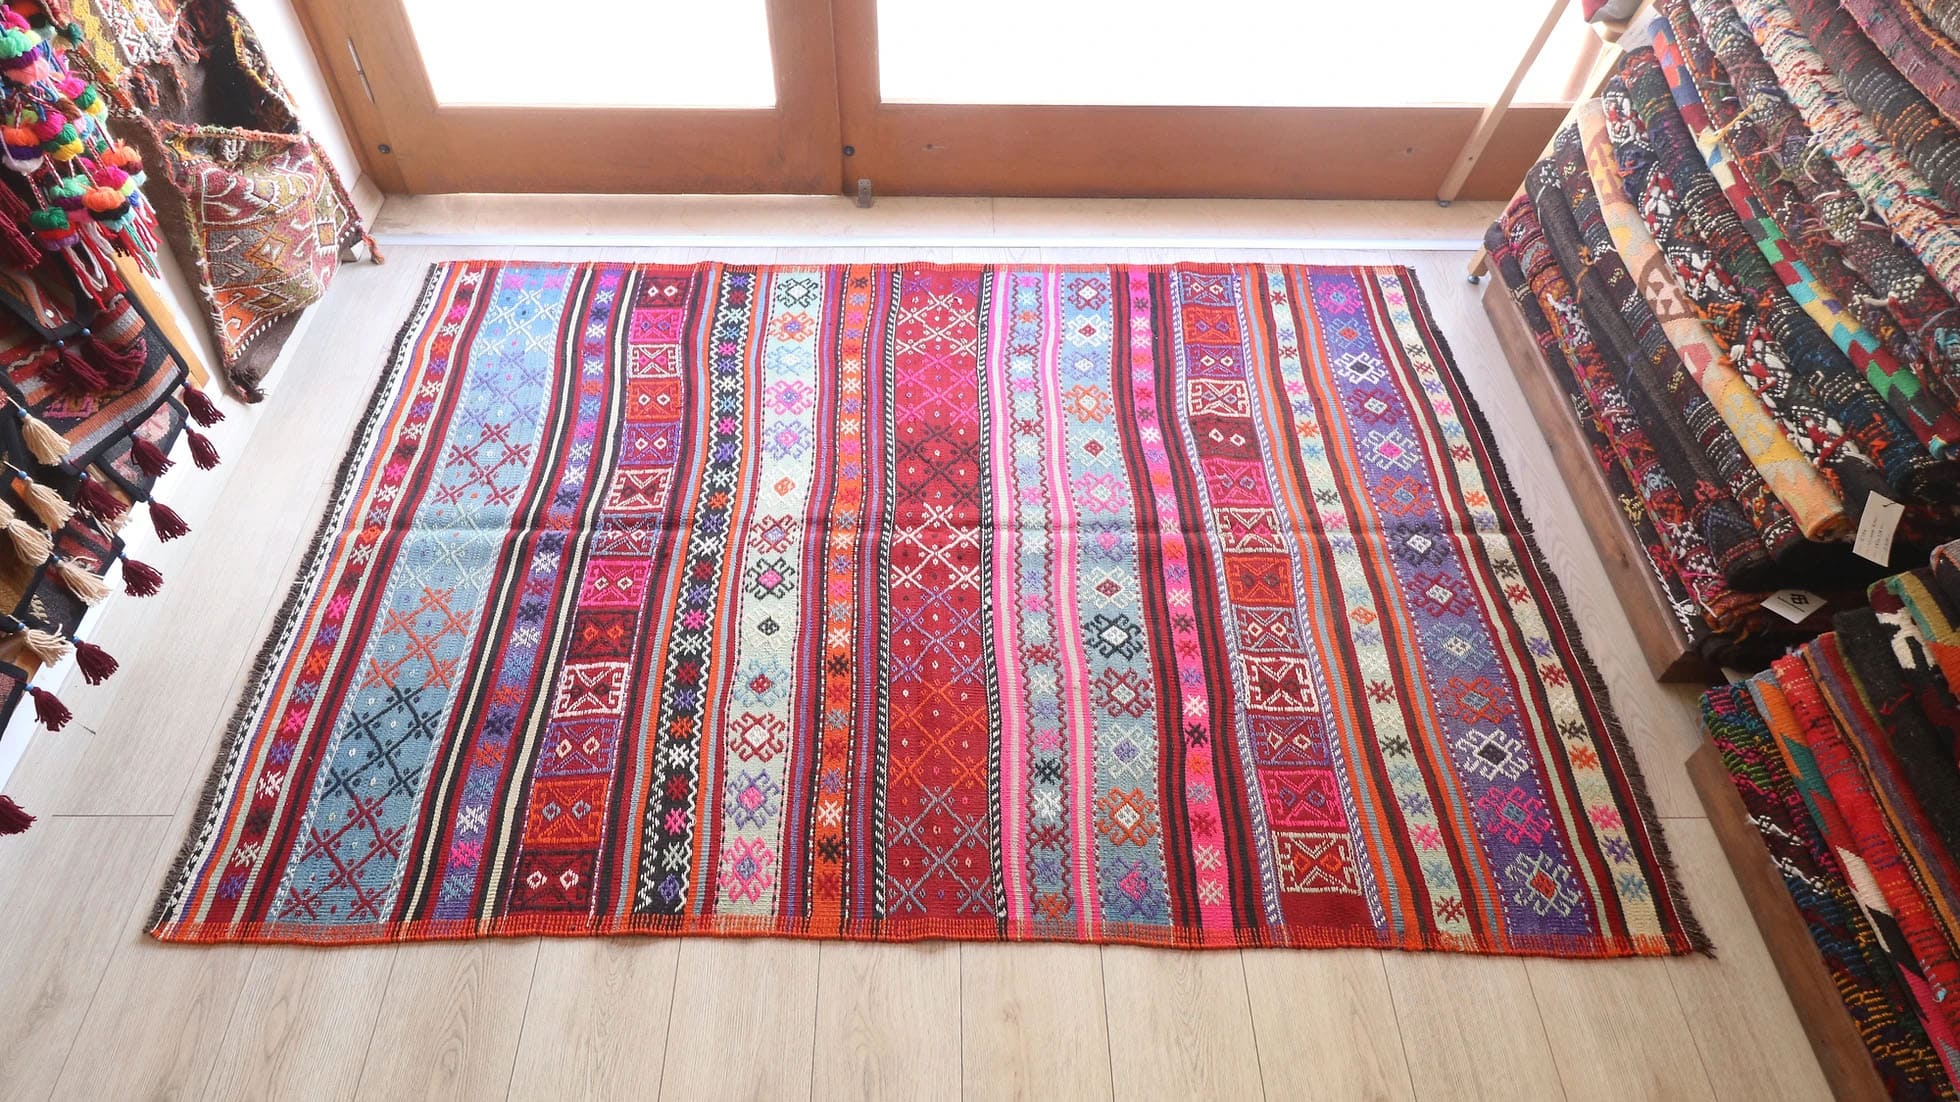 Handwoven Turkish Kilim Rug Measuring 5x7 in Colorful Pink and Purple Tones